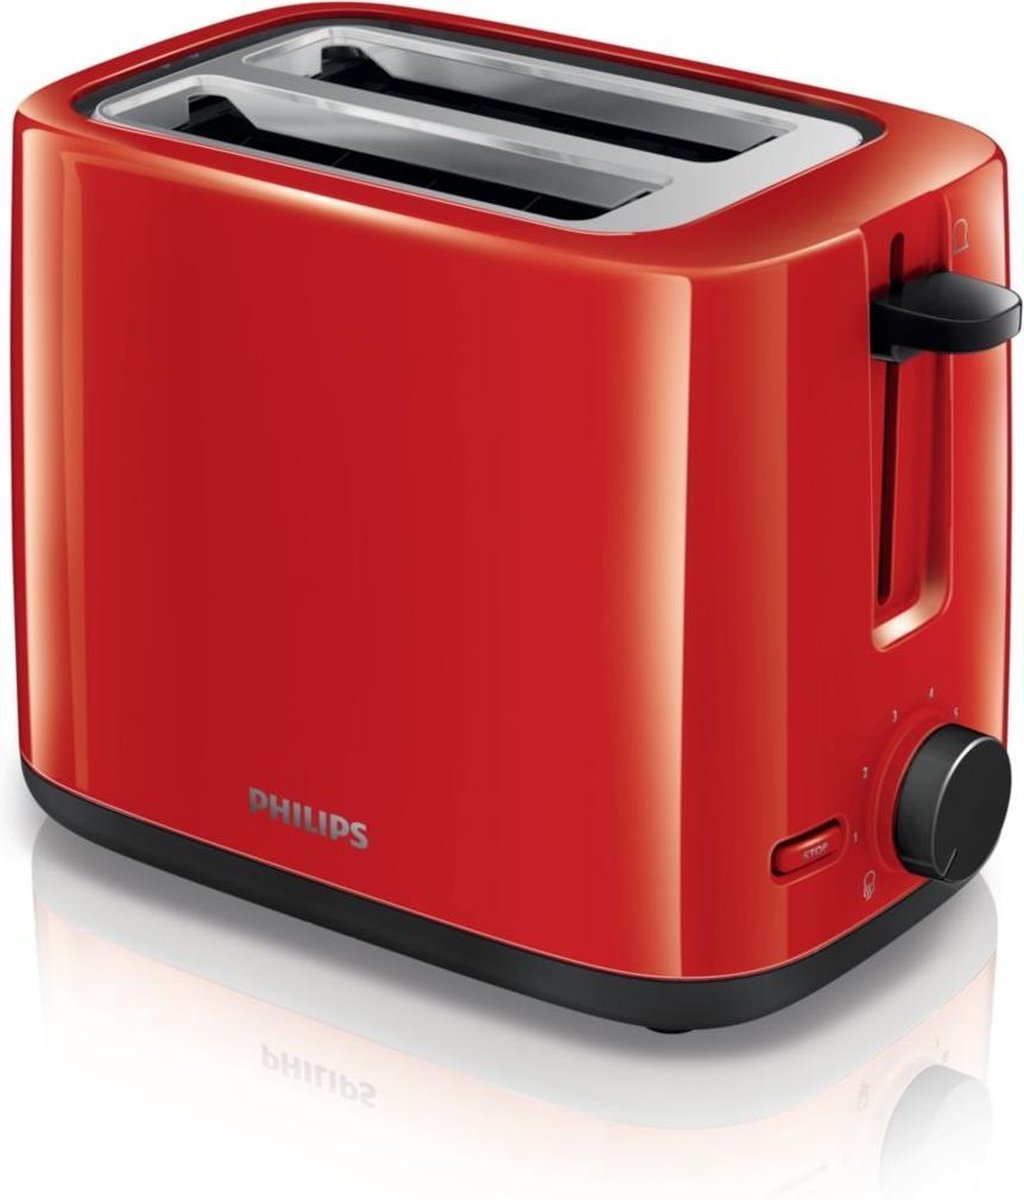 Overleven Renovatie Kalmerend Philips Daily Collection Toaster - rood | bol.com